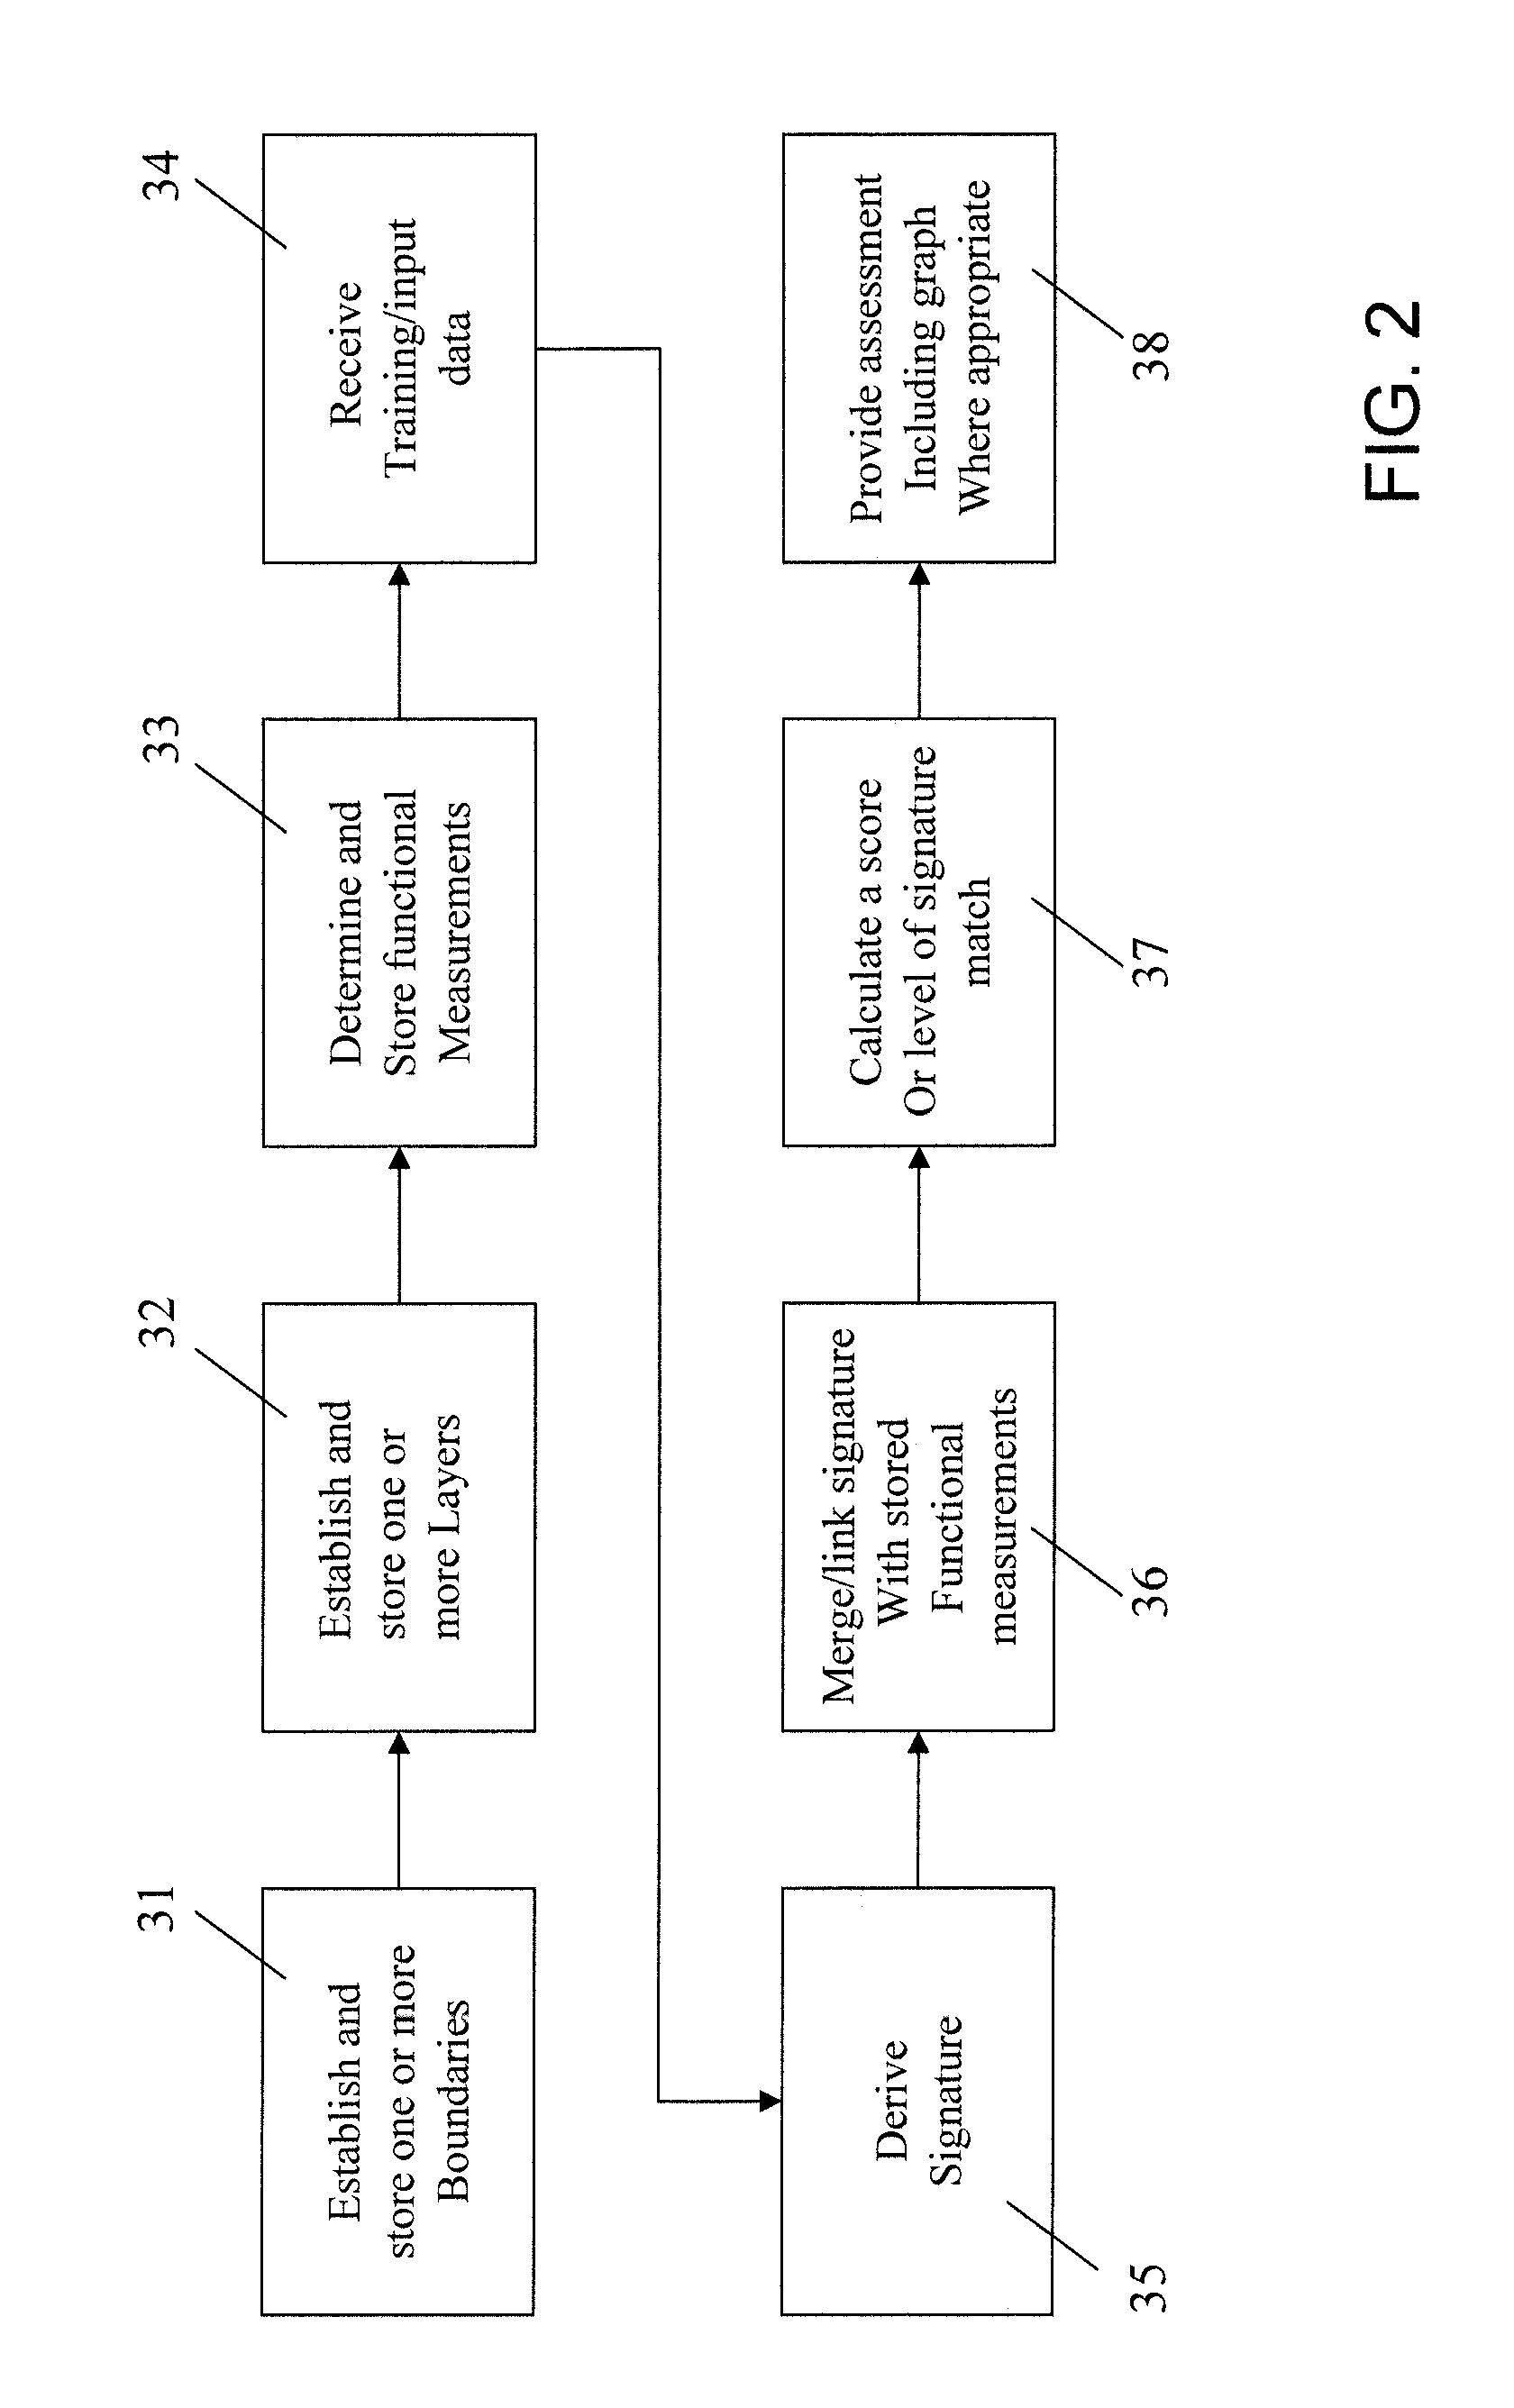 Temporal-Influenced Geospatial Modeling System and Method